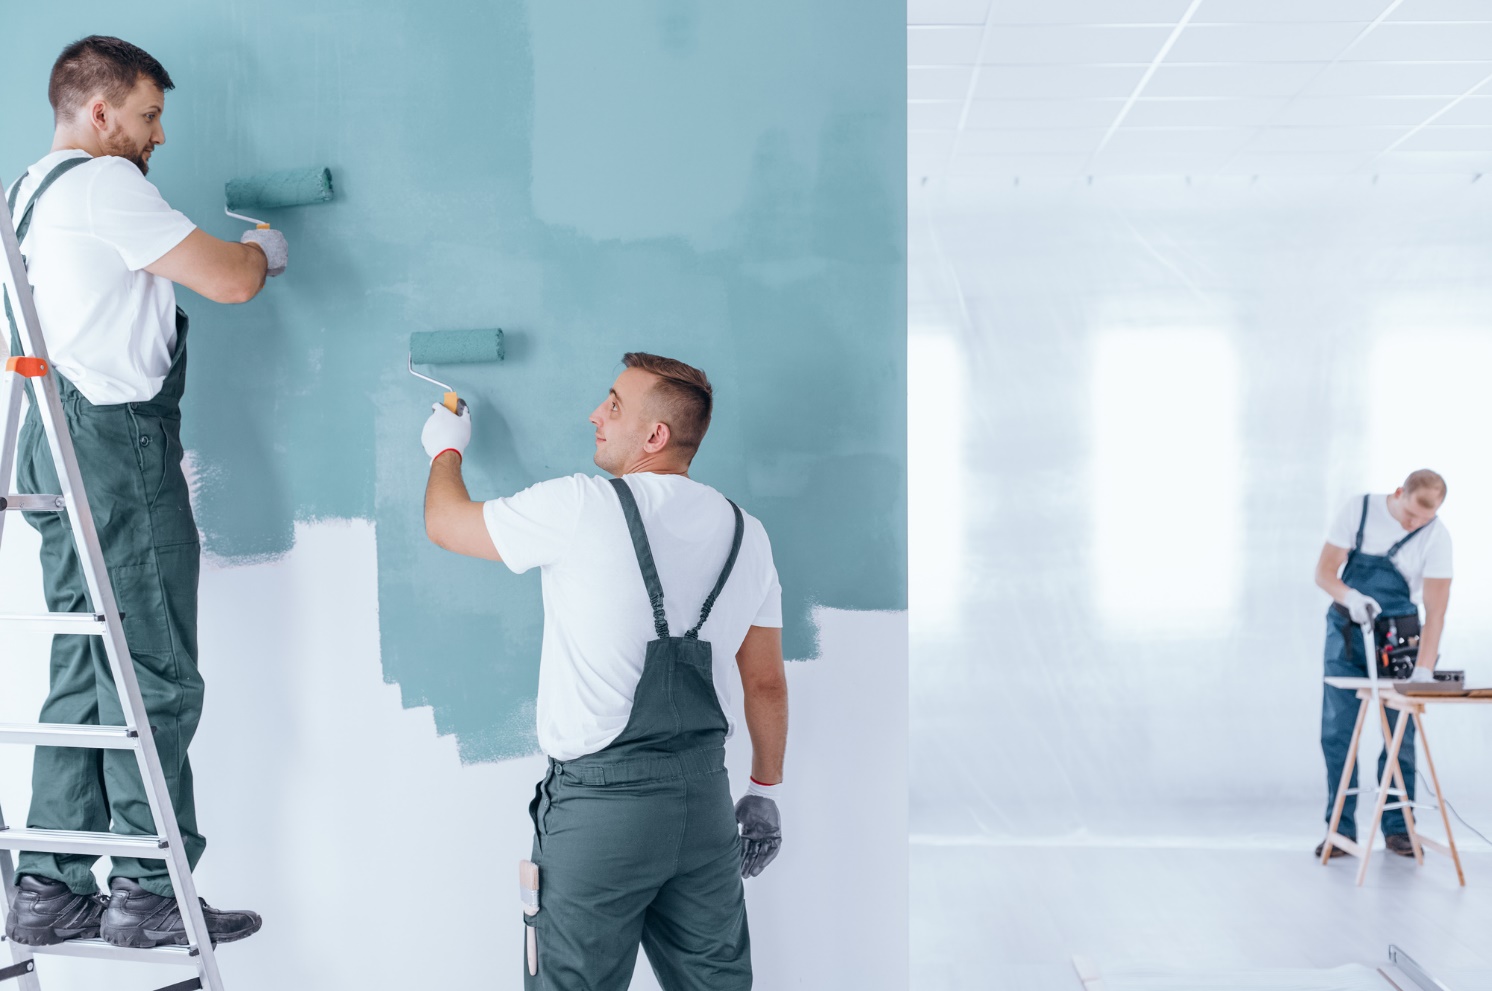 Three men working for a painting company paint a wall in a room.